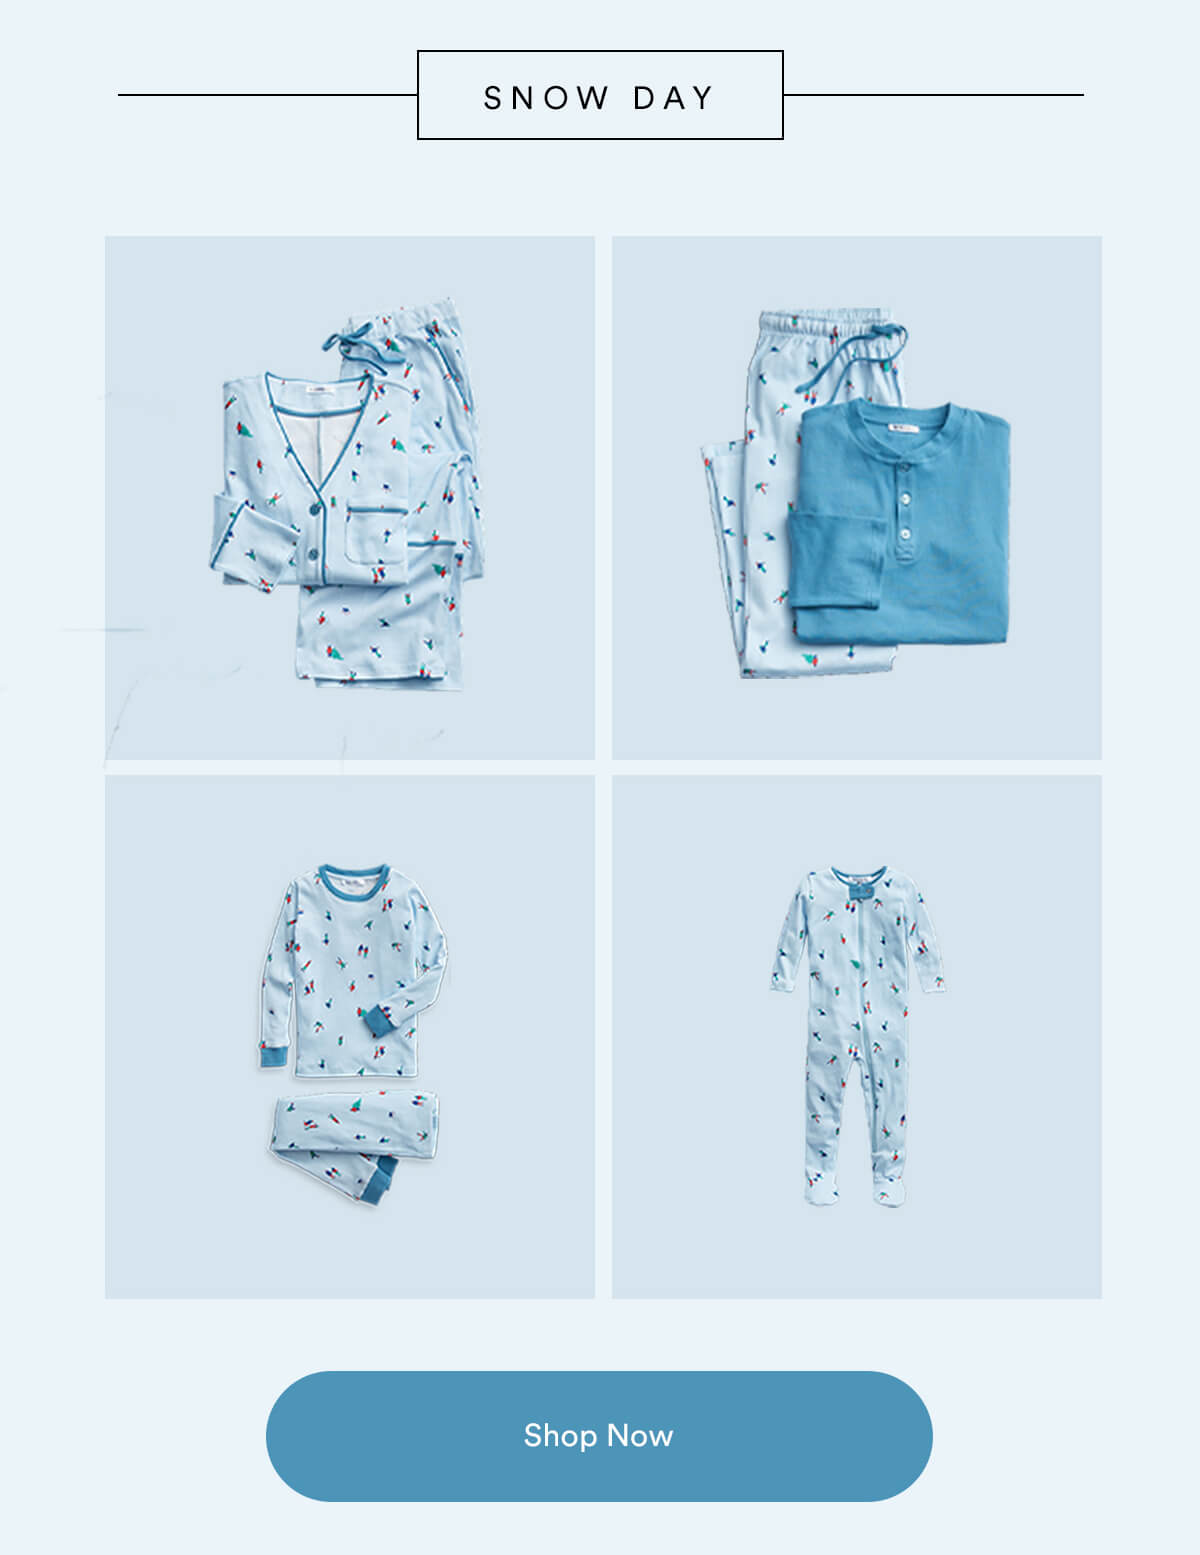 Snow Day Holiday Family Pajamas. Four image grid showing various sizes of Snow Day print.